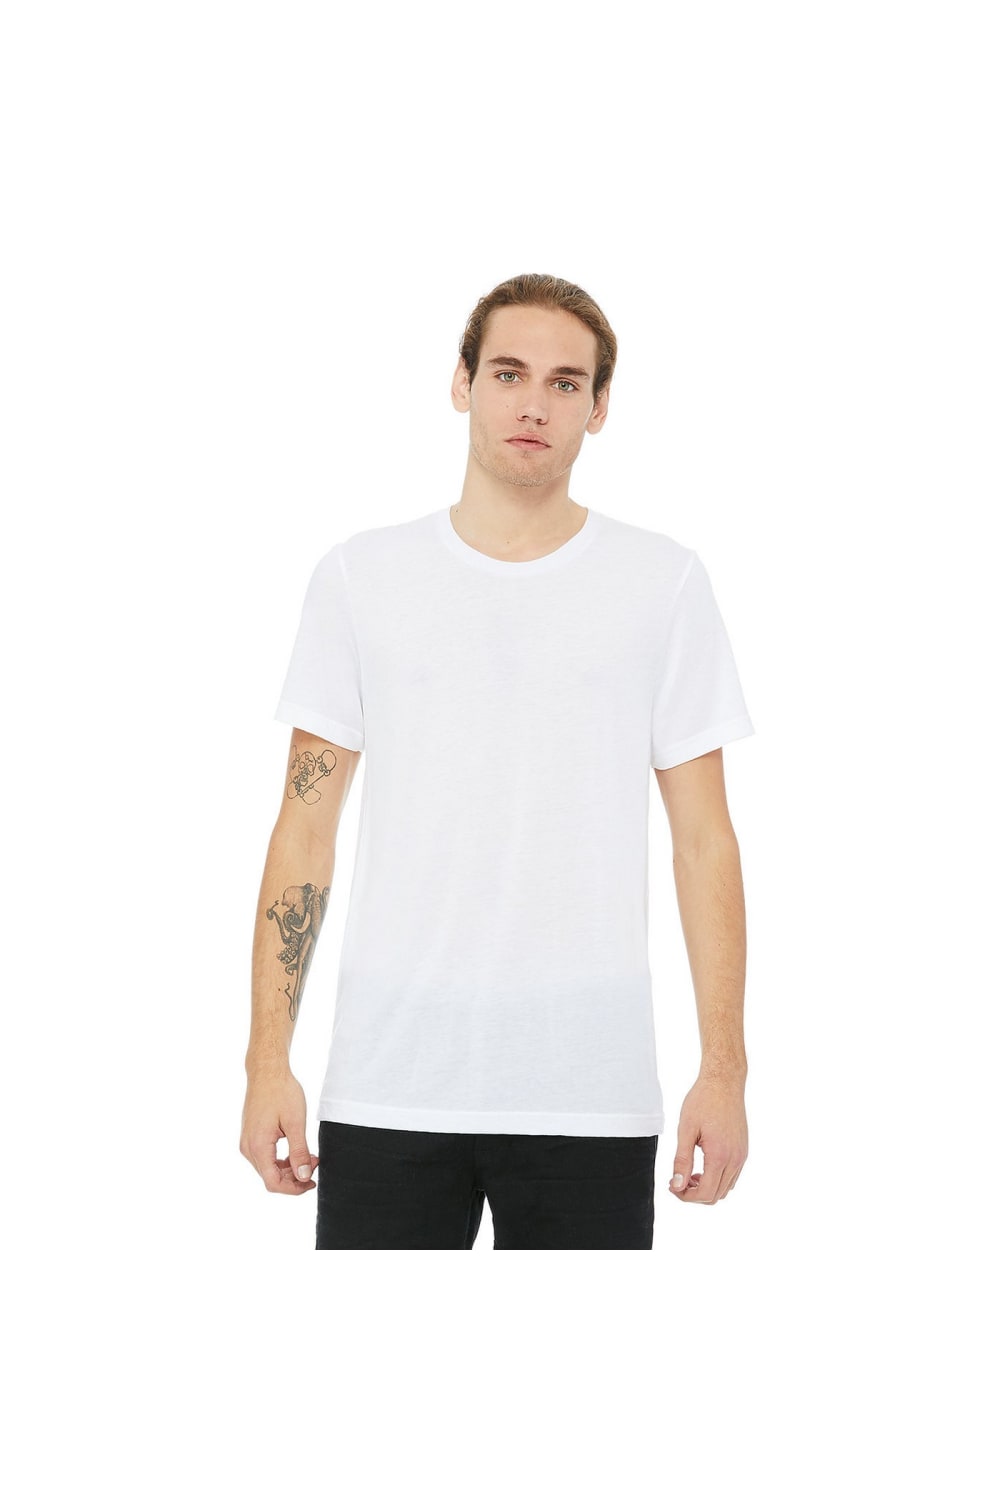 Canvas Triblend Crew Neck T-Shirt / Mens Short Sleeve T-Shirt (Solid White Triblend)